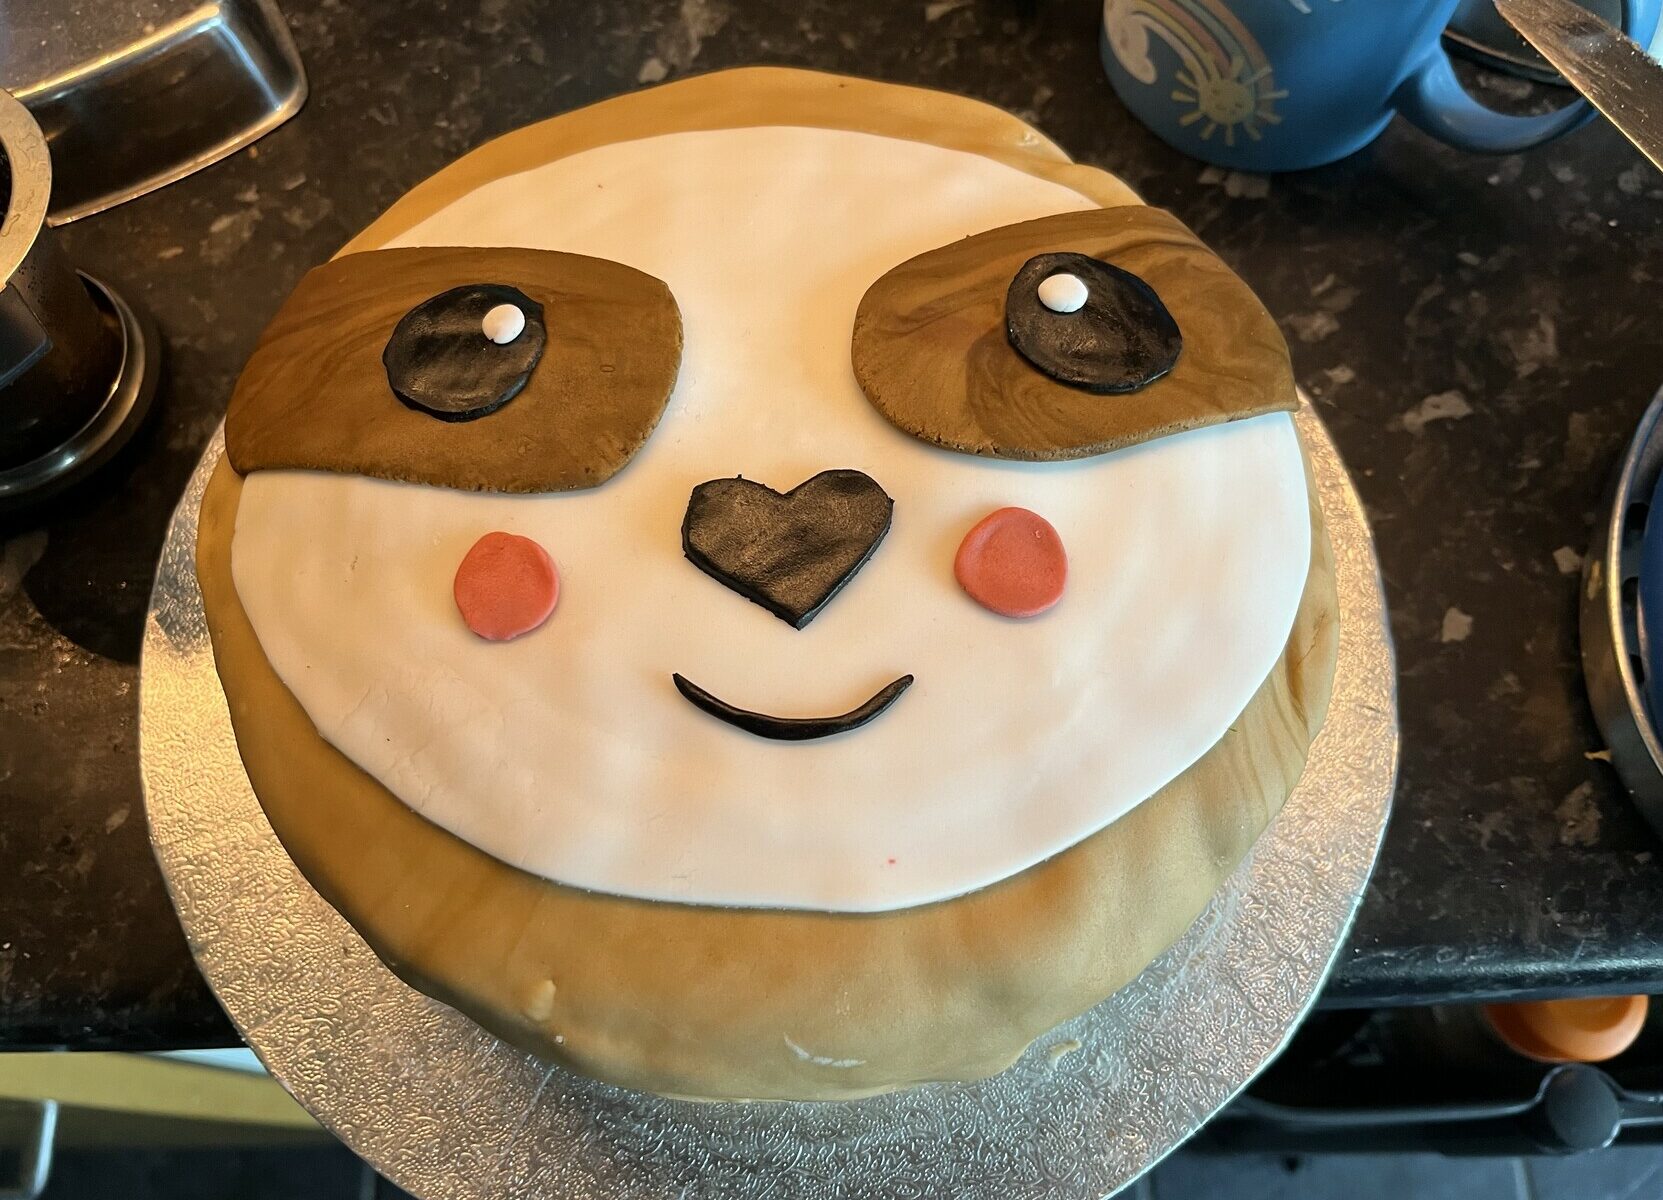 Photo of a cake decorated with a picture of a sloth - the animal type!